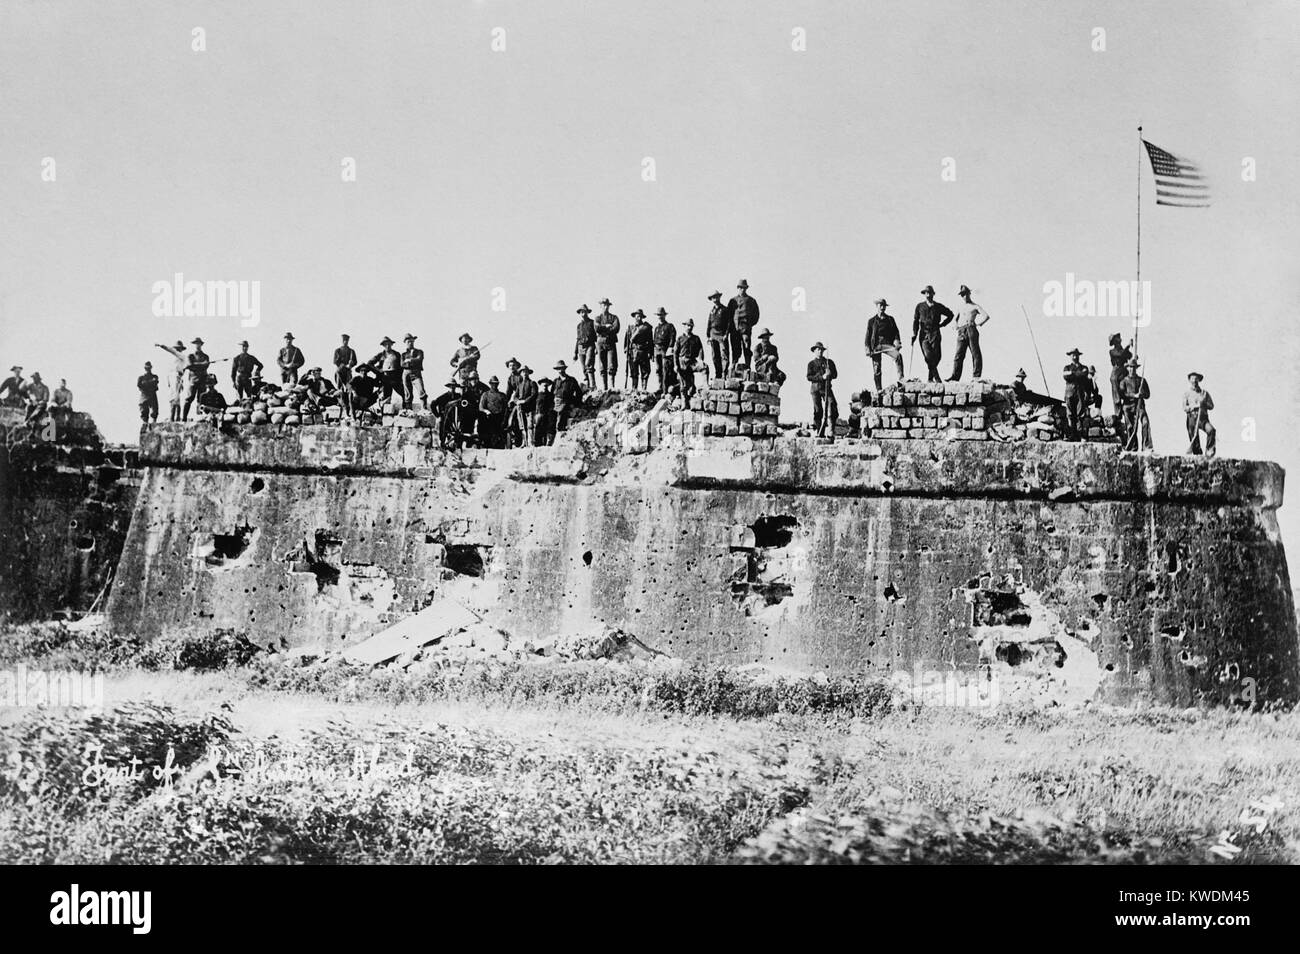 American troops after the flag raising Fort San Antonio de Abad, Malate, Manila, on August 13, 1898. US and Spanish commanders agreed to a choreographed engagement, the mock Battle of Manila, after which the Spanish quickly surrendered to save soldiers lives and Spanish honor. With an easy battle, US did not need the help of the Philippine Revolutionary army, and prevented their entry into Manila, thus weakening their claim for national independence (BSLOC 2017 10 66) Stock Photo